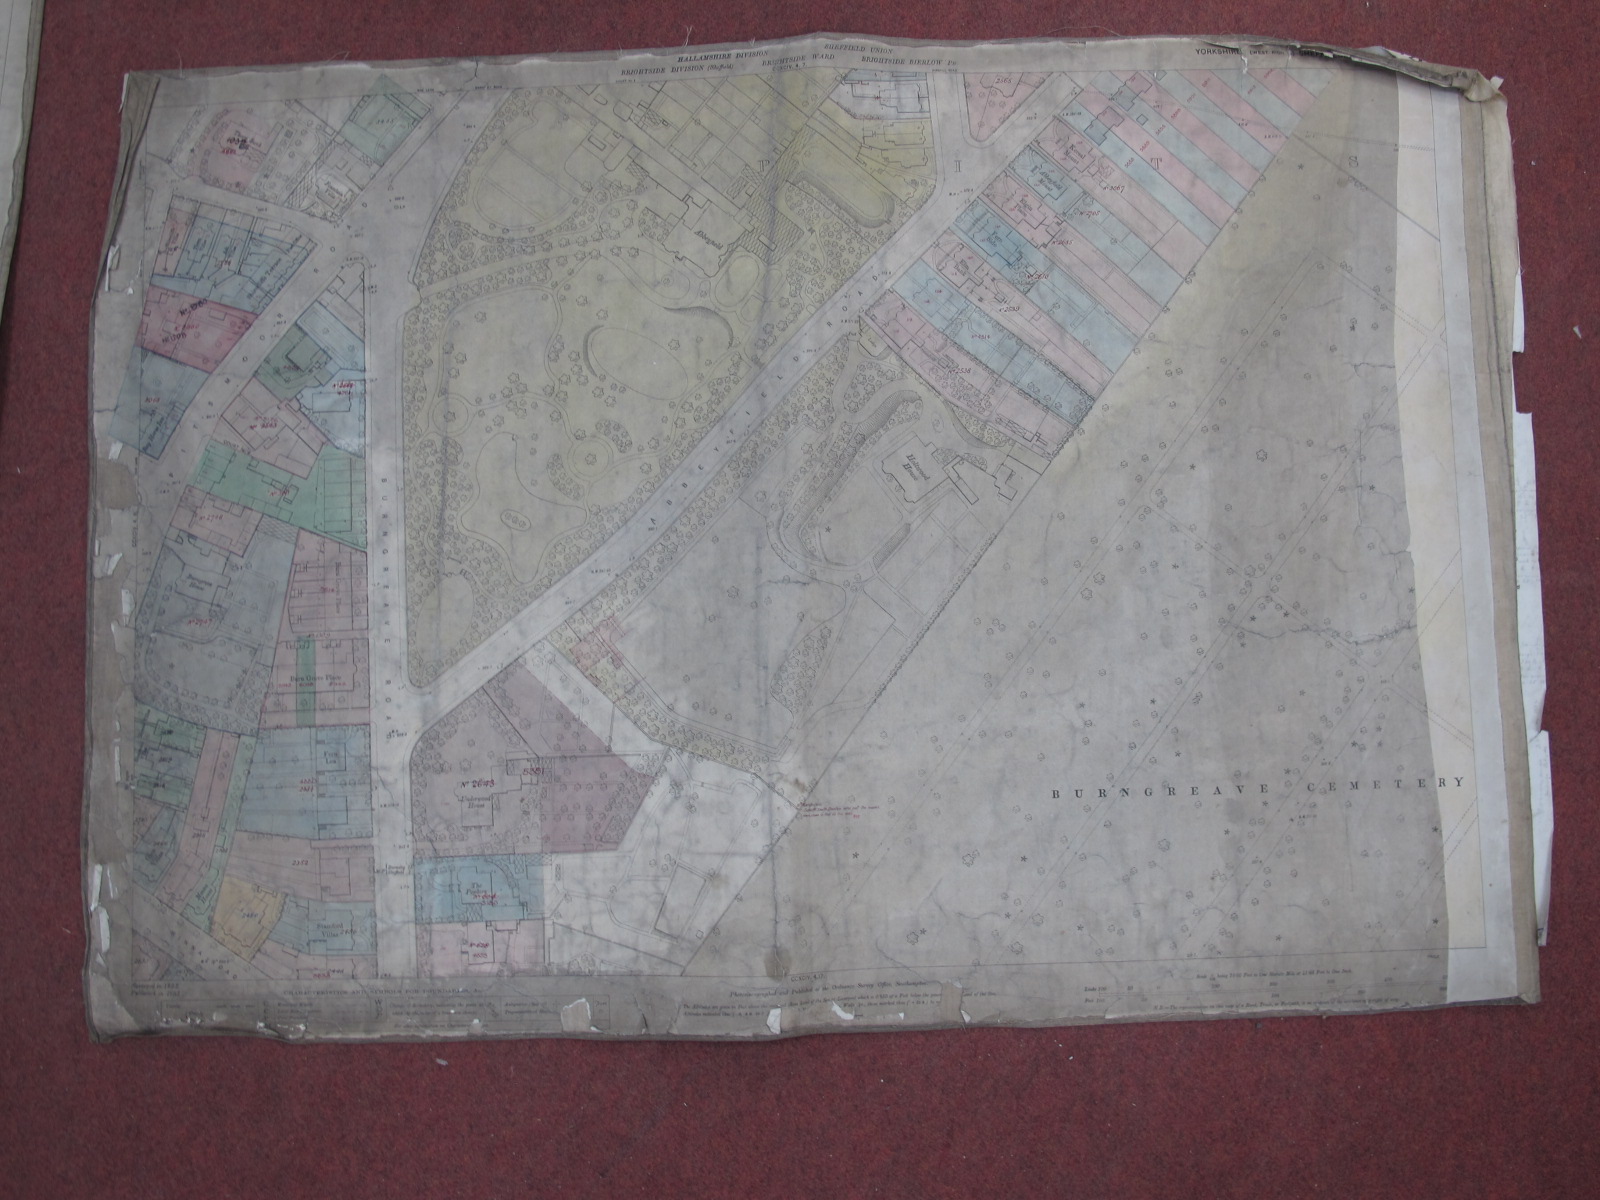 Sheffield Maps, Brightside, Burngreave - some dates noted, 1893, 1890, various scales, dirty and - Image 6 of 10